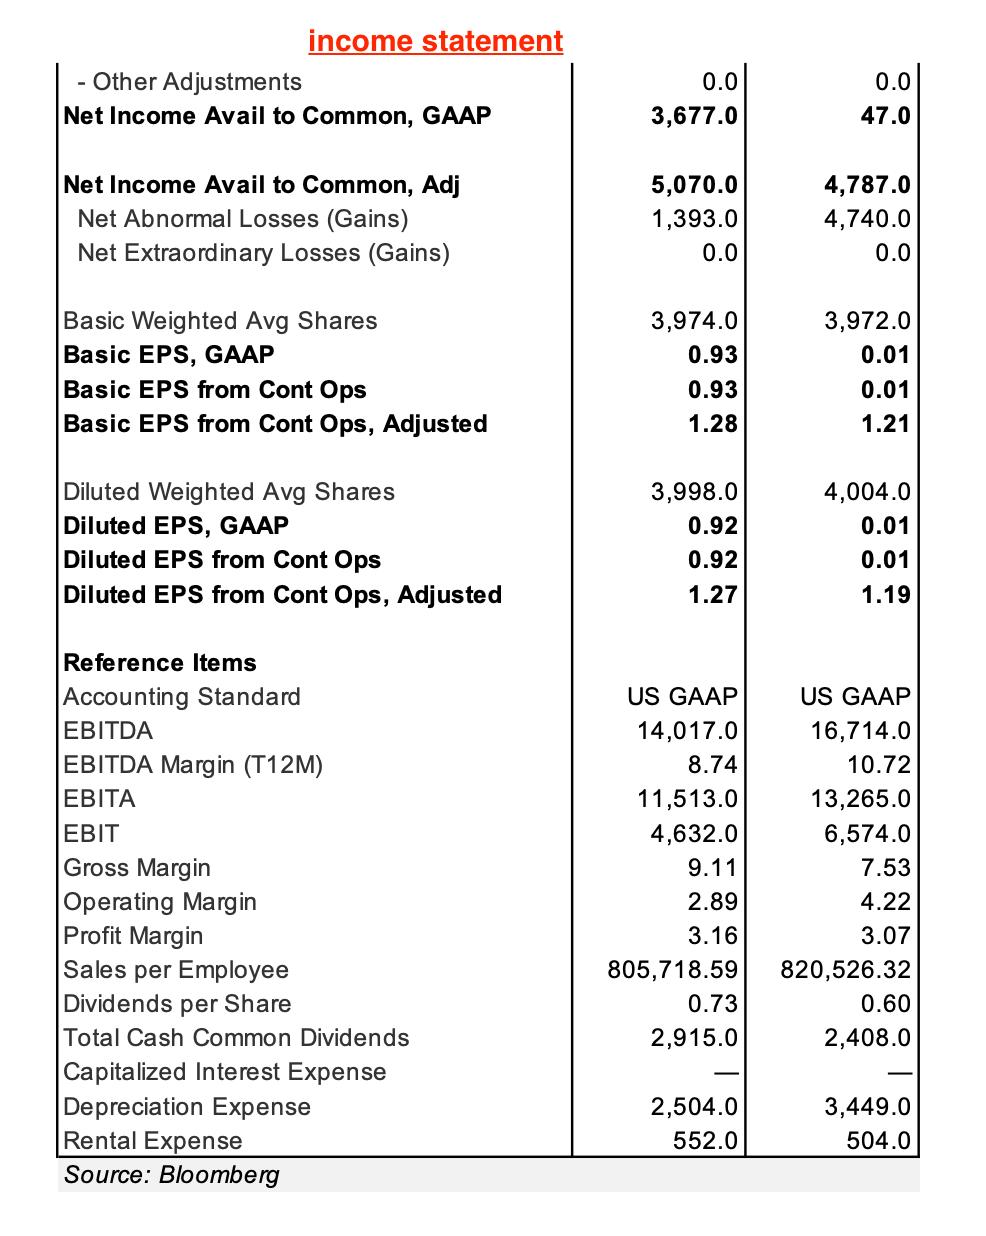 income statement - Other Adjustments Net Income Avail to Common, GAAP 0.0 3,677.0 0.0 47.0 Net Income Avail to Common, Adj Ne